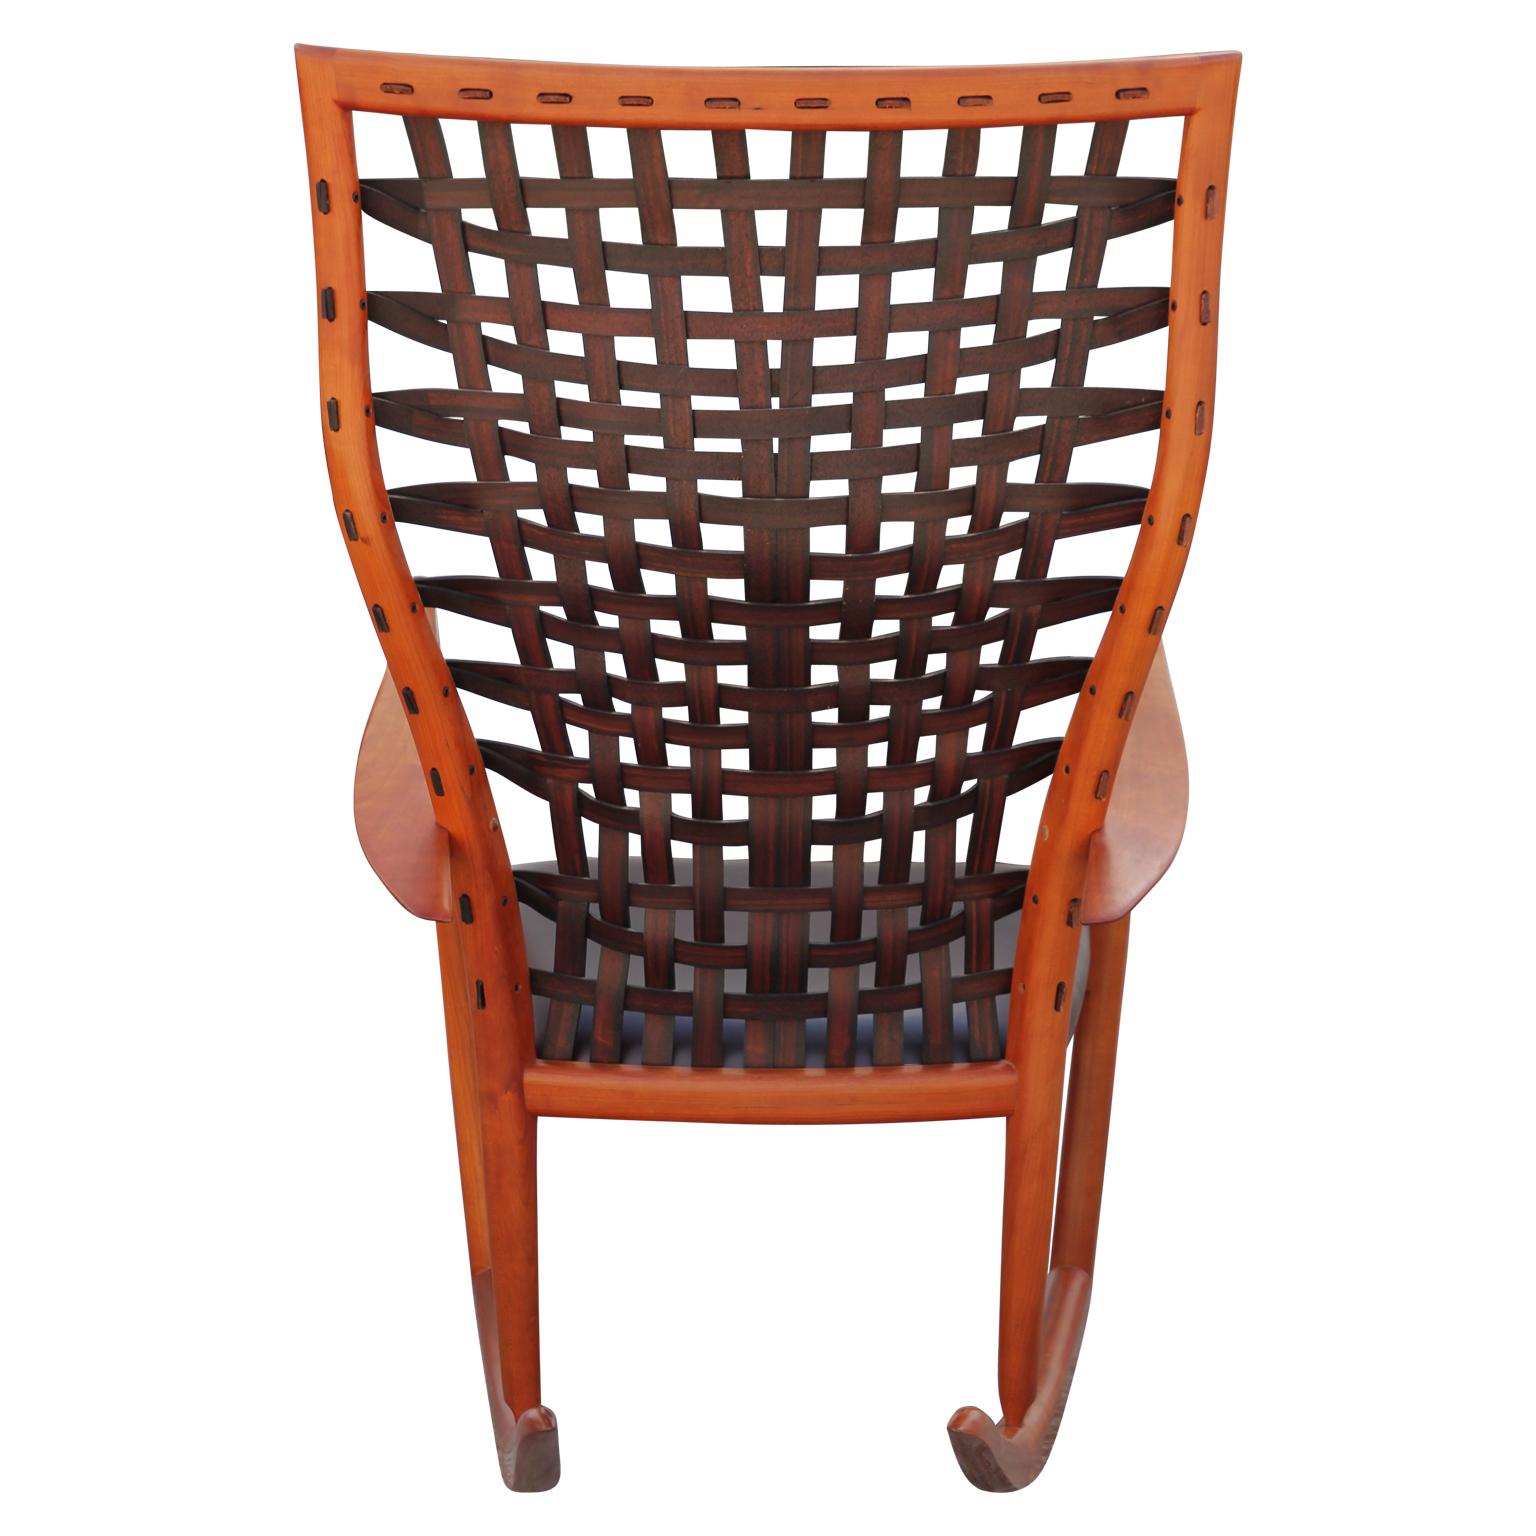 American Sculptural Modern Handmade Cherrywood and Woven Leather Rocking Chair